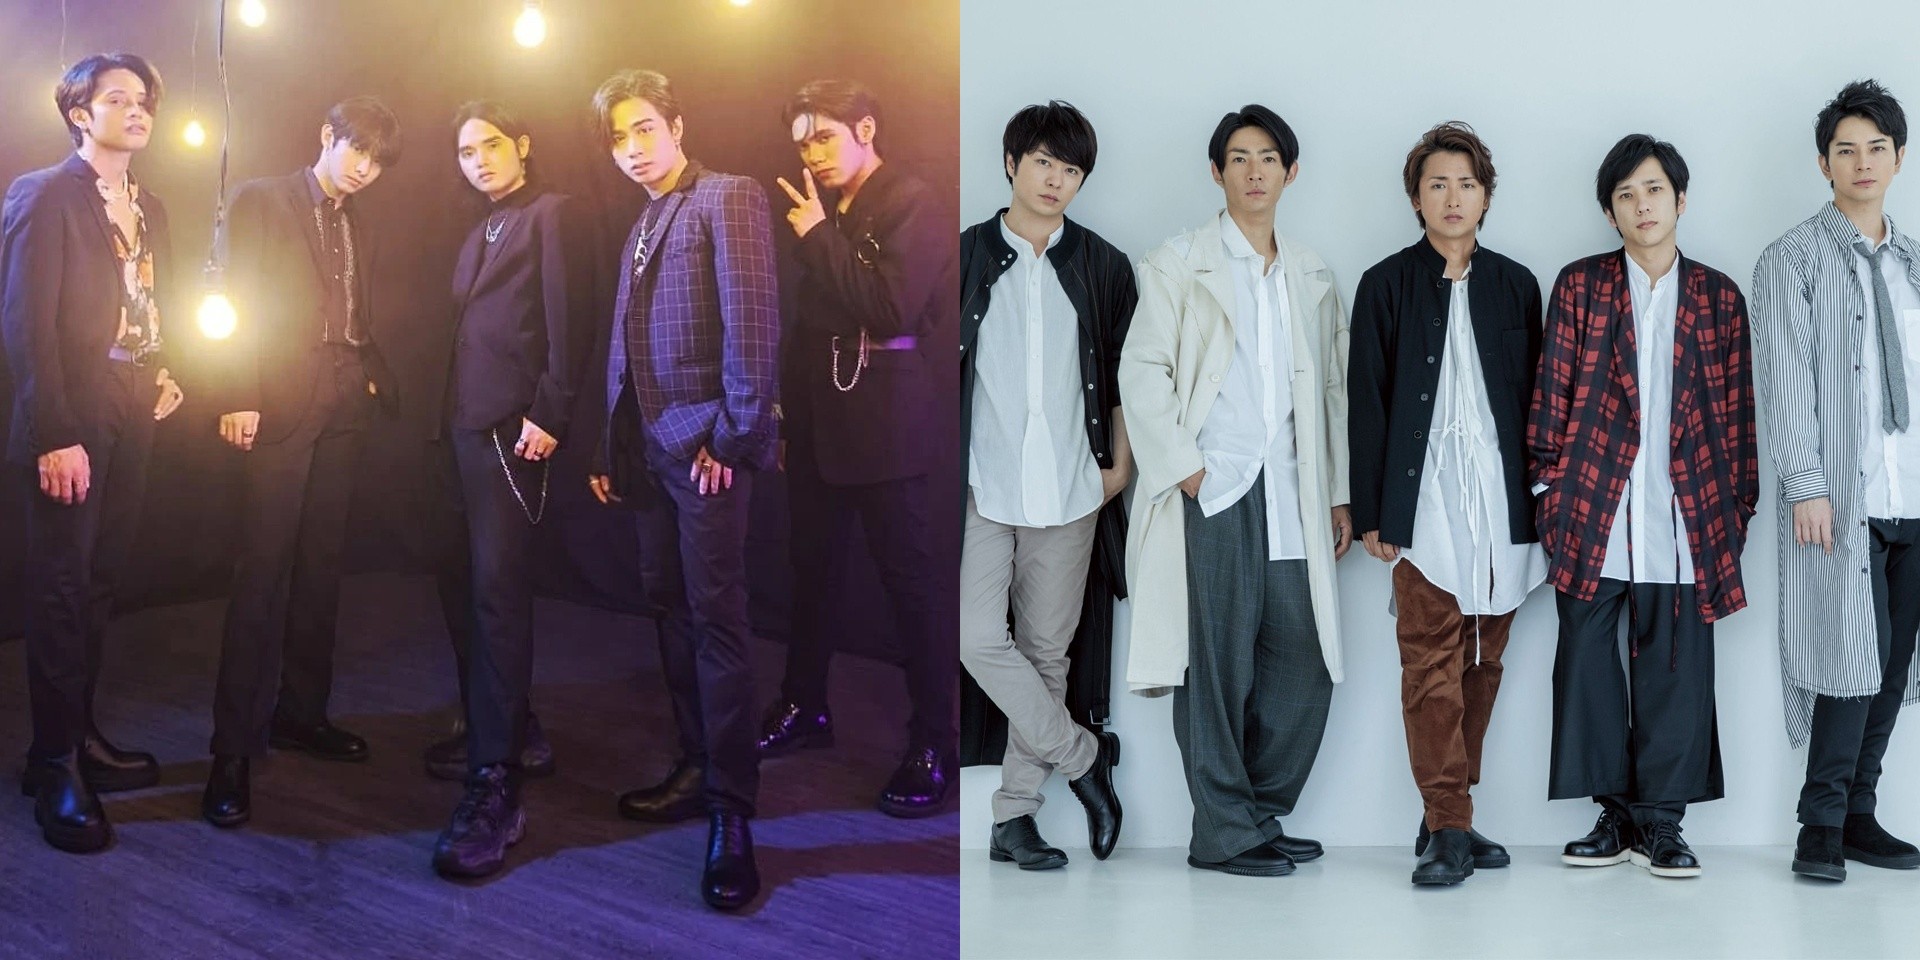 SB19 and ARASHI fans team up for Twitter-trending virtual streaming parties